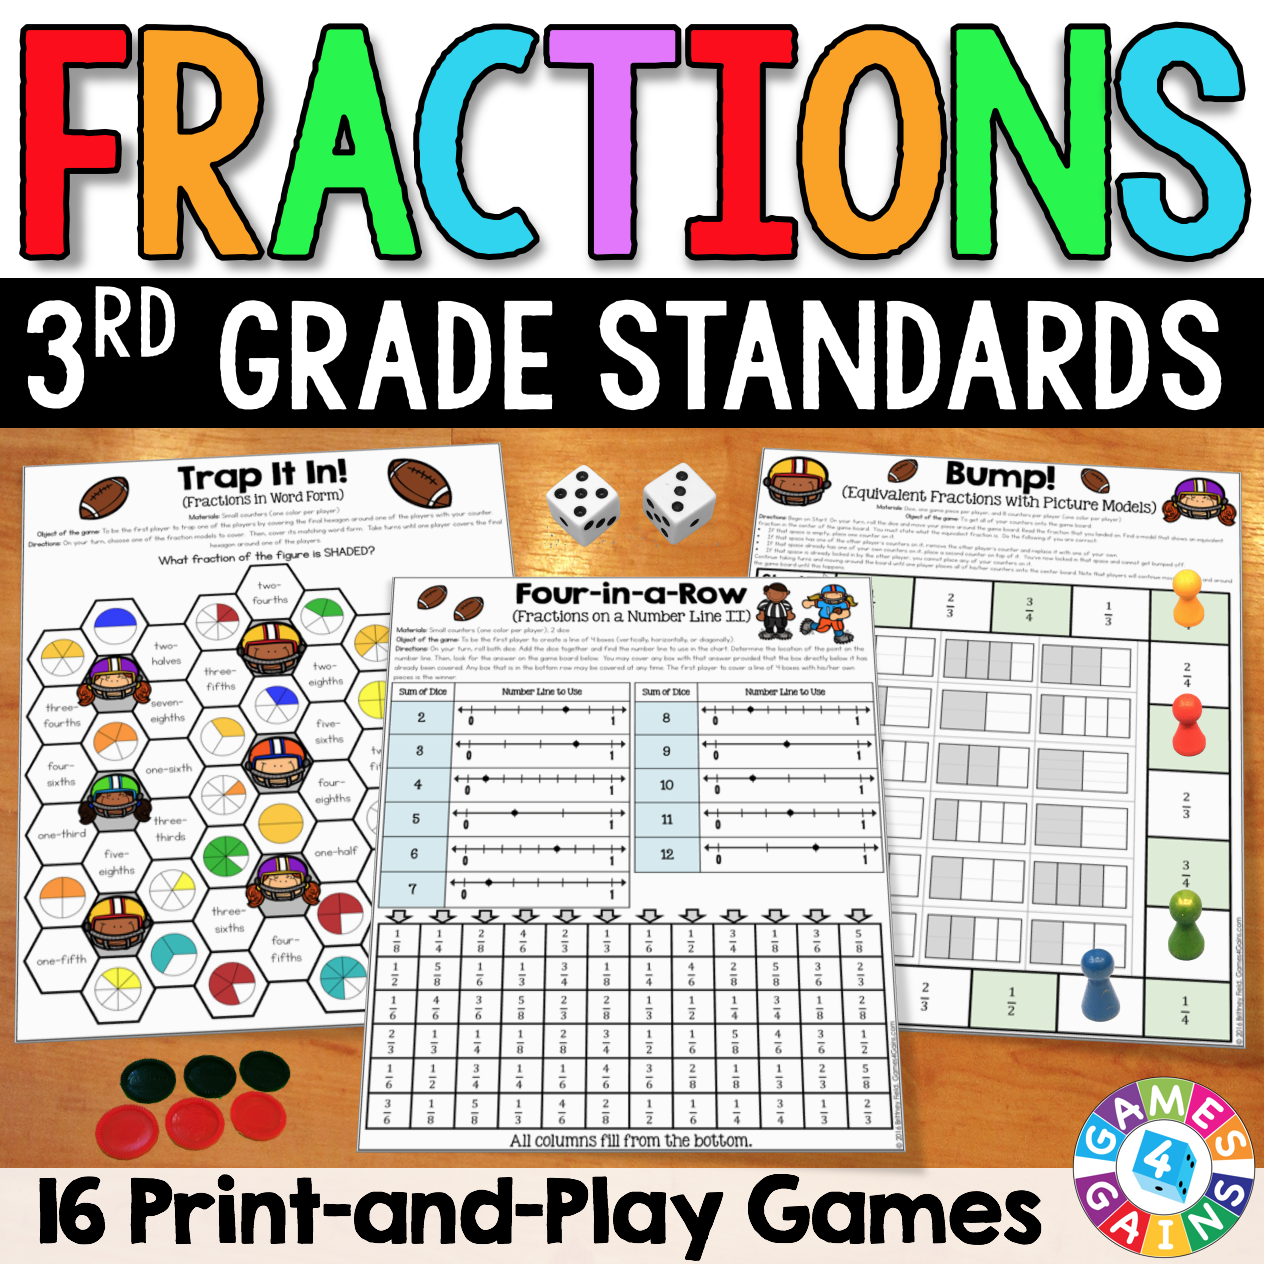 Fractions Games for 3rd Grade Cover.png